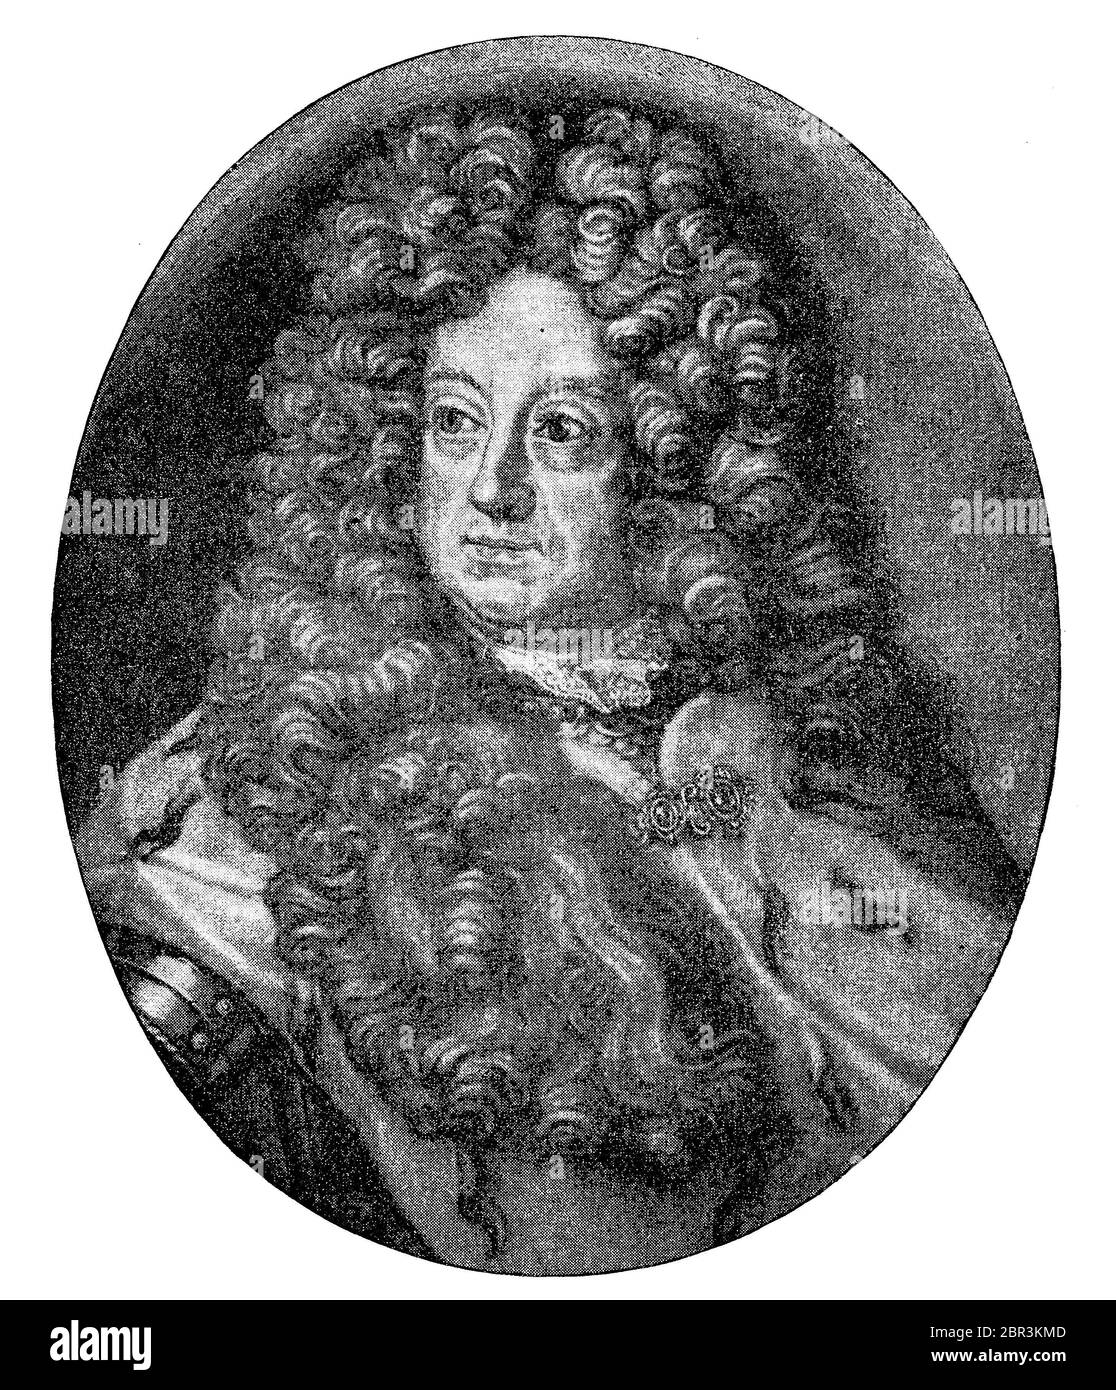 Ernst August I. 19, April 1688 - 19 January 1748 was, Duke of Saxe-Weimar and from 1741 also of Saxe-Eisenach. He came from the Ernestine line of the House of Wettin  /  Ernst August I. 19., April 1688 - 19. Januar 1748, war Herzog von Sachsen-Weimar und ab 1741 auch von Sachsen-Eisenach. Er stammte aus der ernestinischen Linie des Hauses Wettin, Historisch, historical, digital improved reproduction of an original from the 19th century / digitale Reproduktion einer Originalvorlage aus dem 19. Jahrhundert, Stock Photo